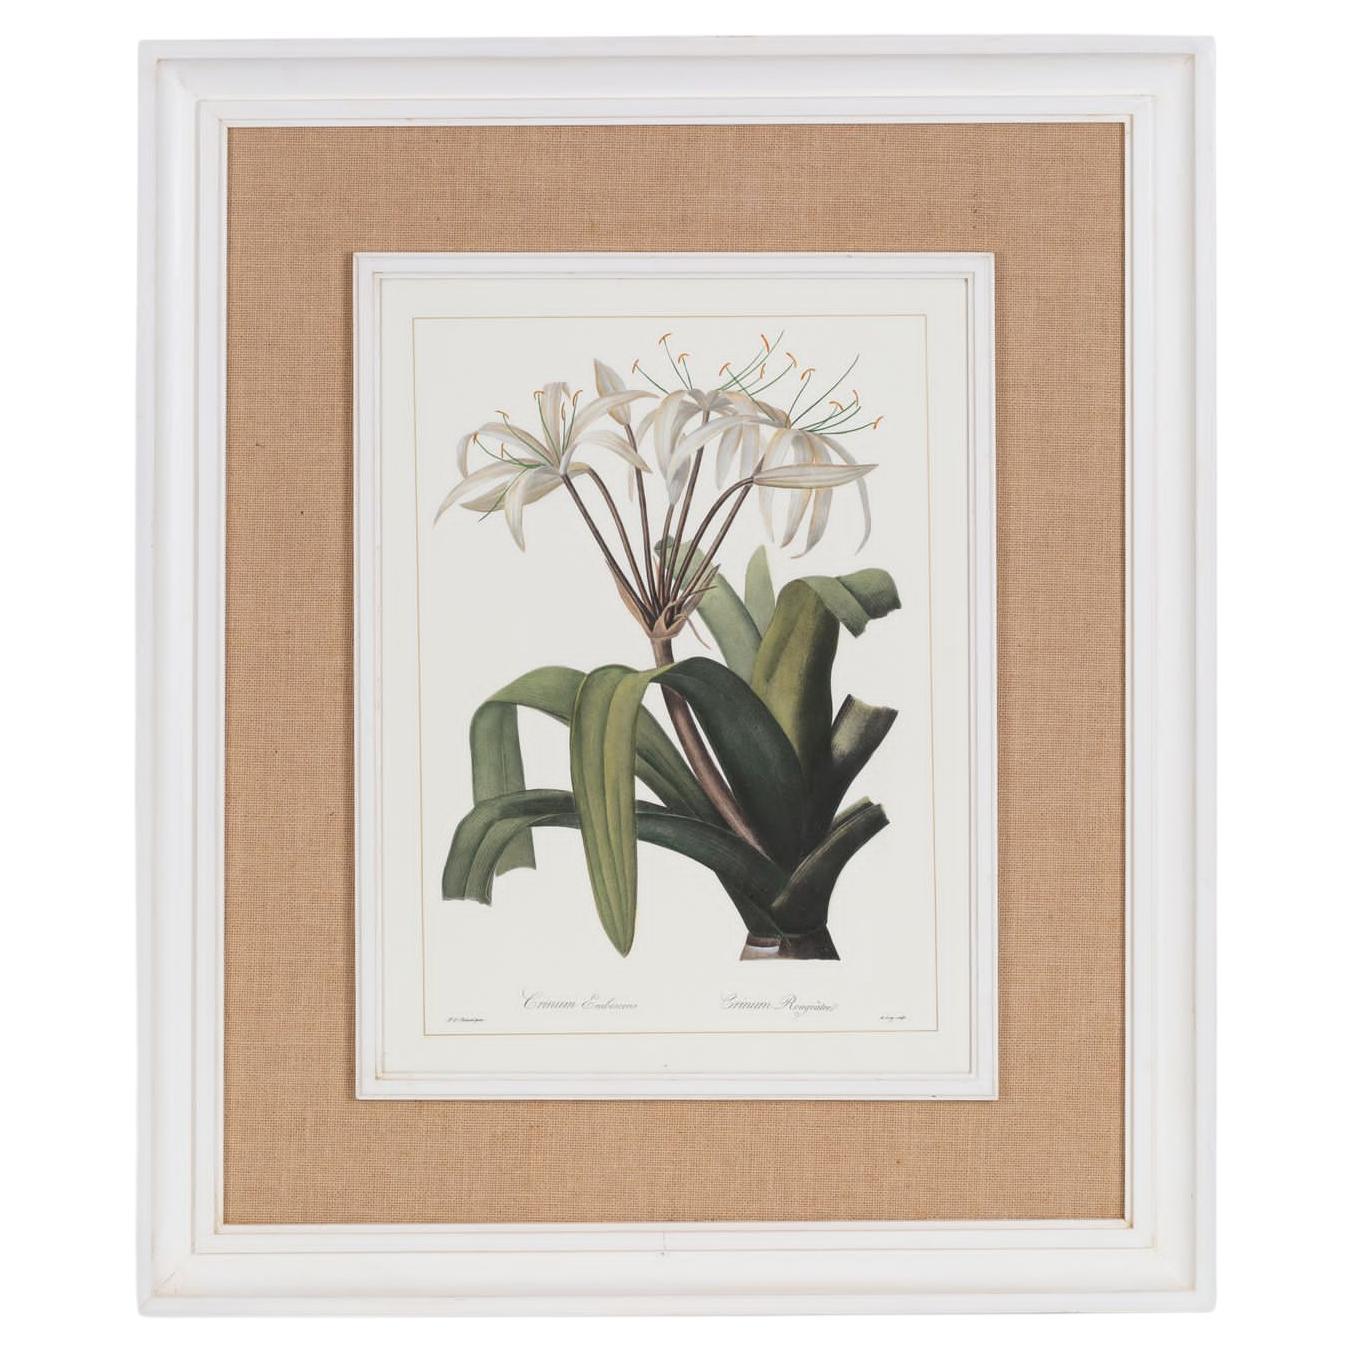 Italian Contemporary HandCrafted Print "Crinum" with Wood and Jute Frame 1 of 2 For Sale